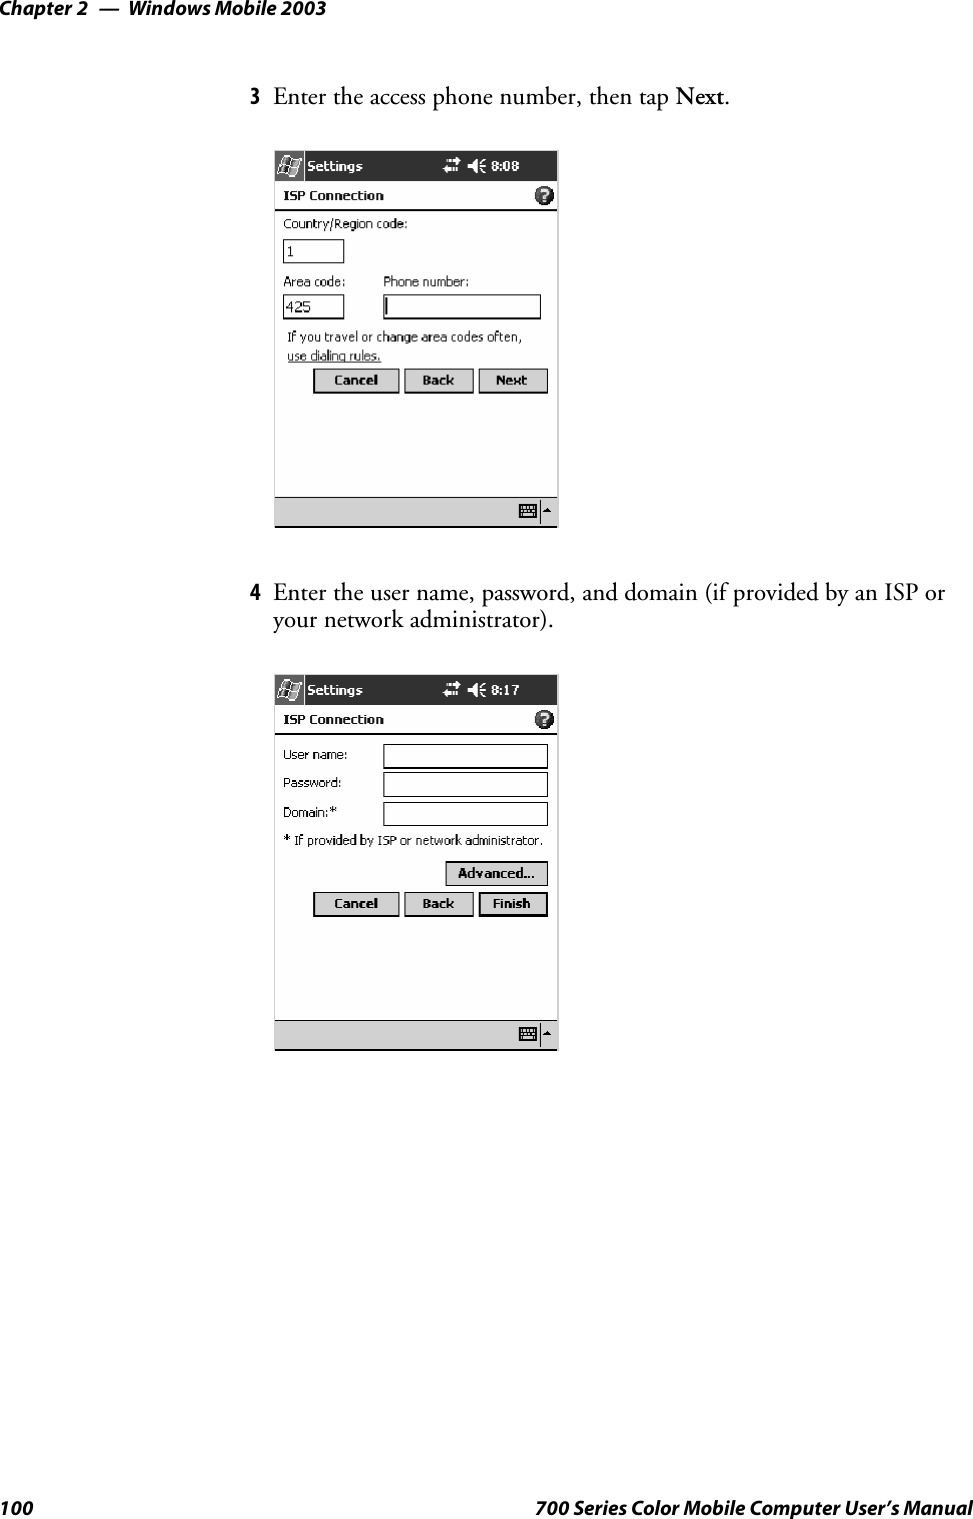 Windows Mobile 2003Chapter —2100 700 Series Color Mobile Computer User’s Manual3Enter the access phone number, then tap Next.4Enter the user name, password, and domain (if provided by an ISP oryour network administrator).